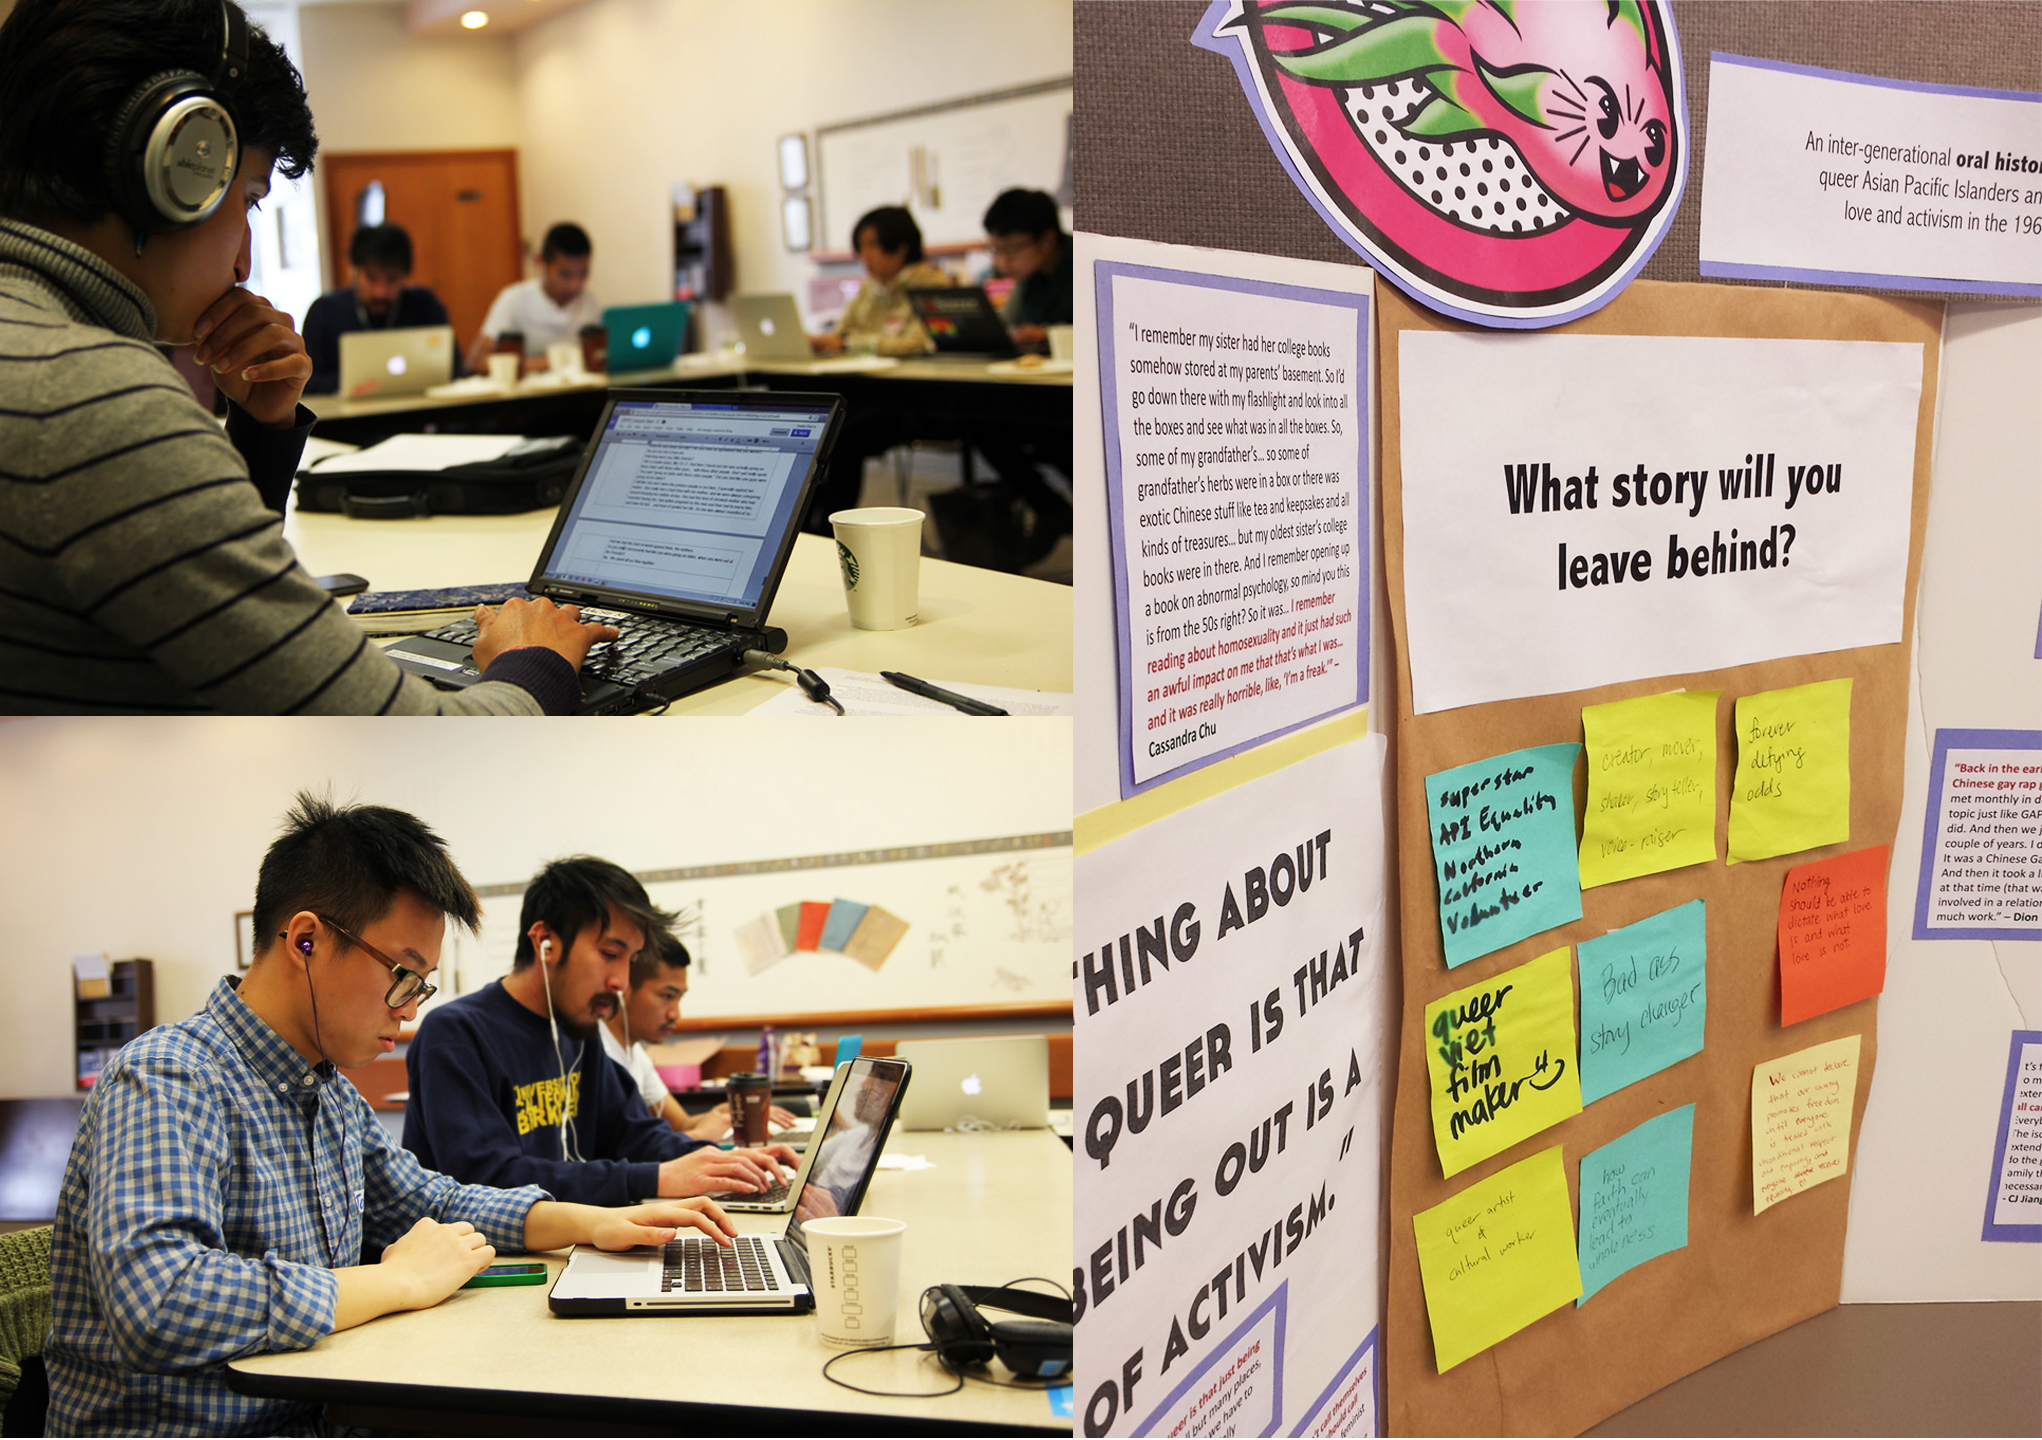 "Left: API Equality - Northern California volunteers at a Dragon Fruit Project transcribing event; Right: A Dragon Fruit Project presentation board with main text, 'What story will you leave behind?'"